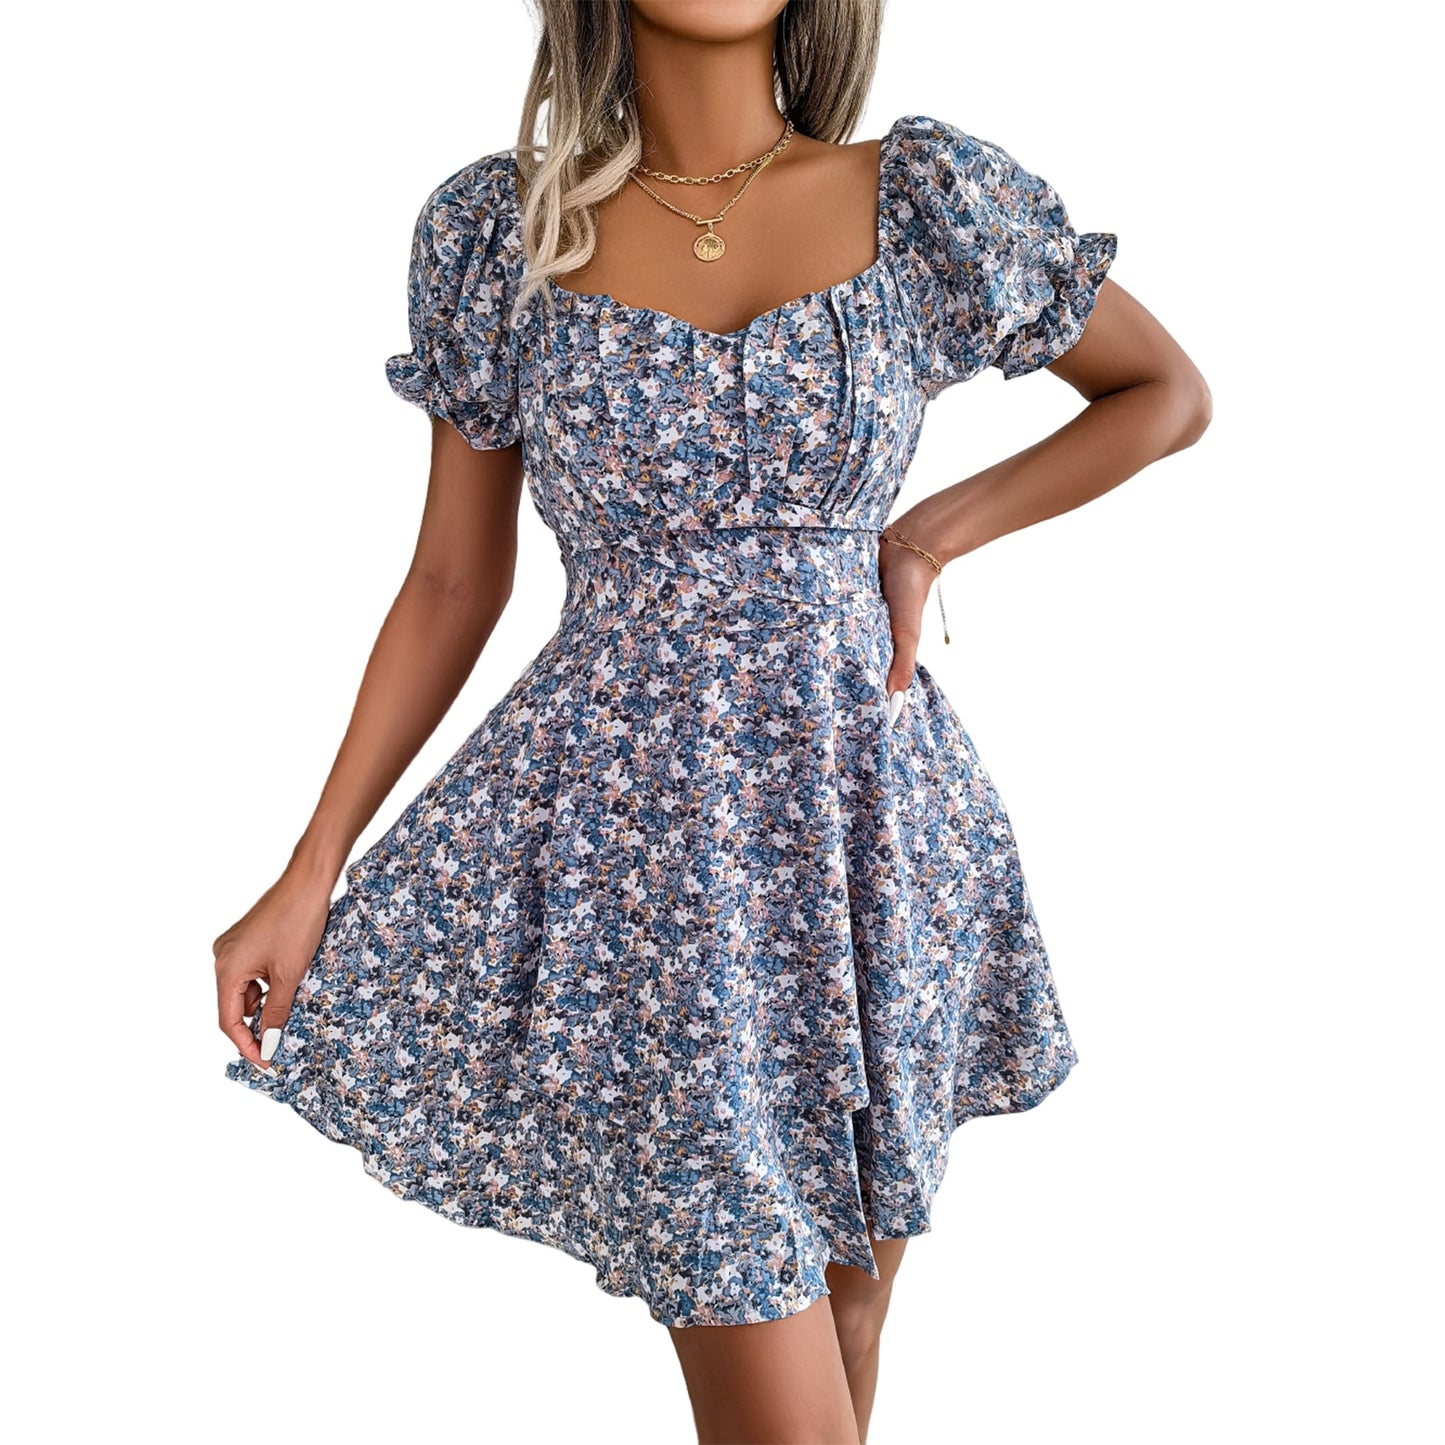 Ladies Printing Dress Lace-up Female Beach Mini Dress Waist Up Floral Dress Puff Sleeve Women Daily Wear Dating Shopping